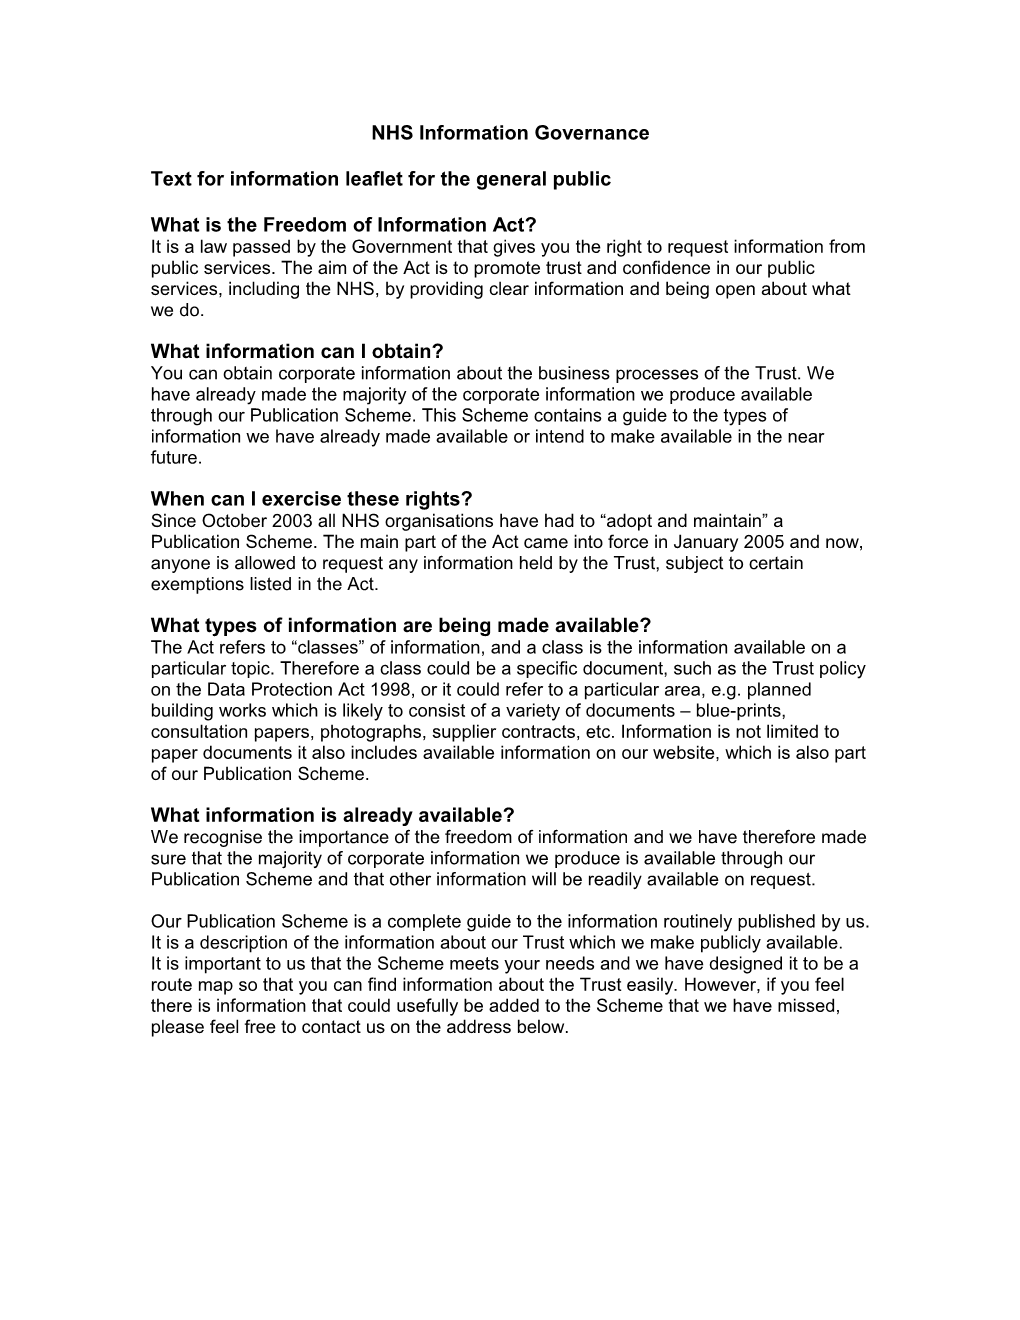 Text for Patient Information Leaflet